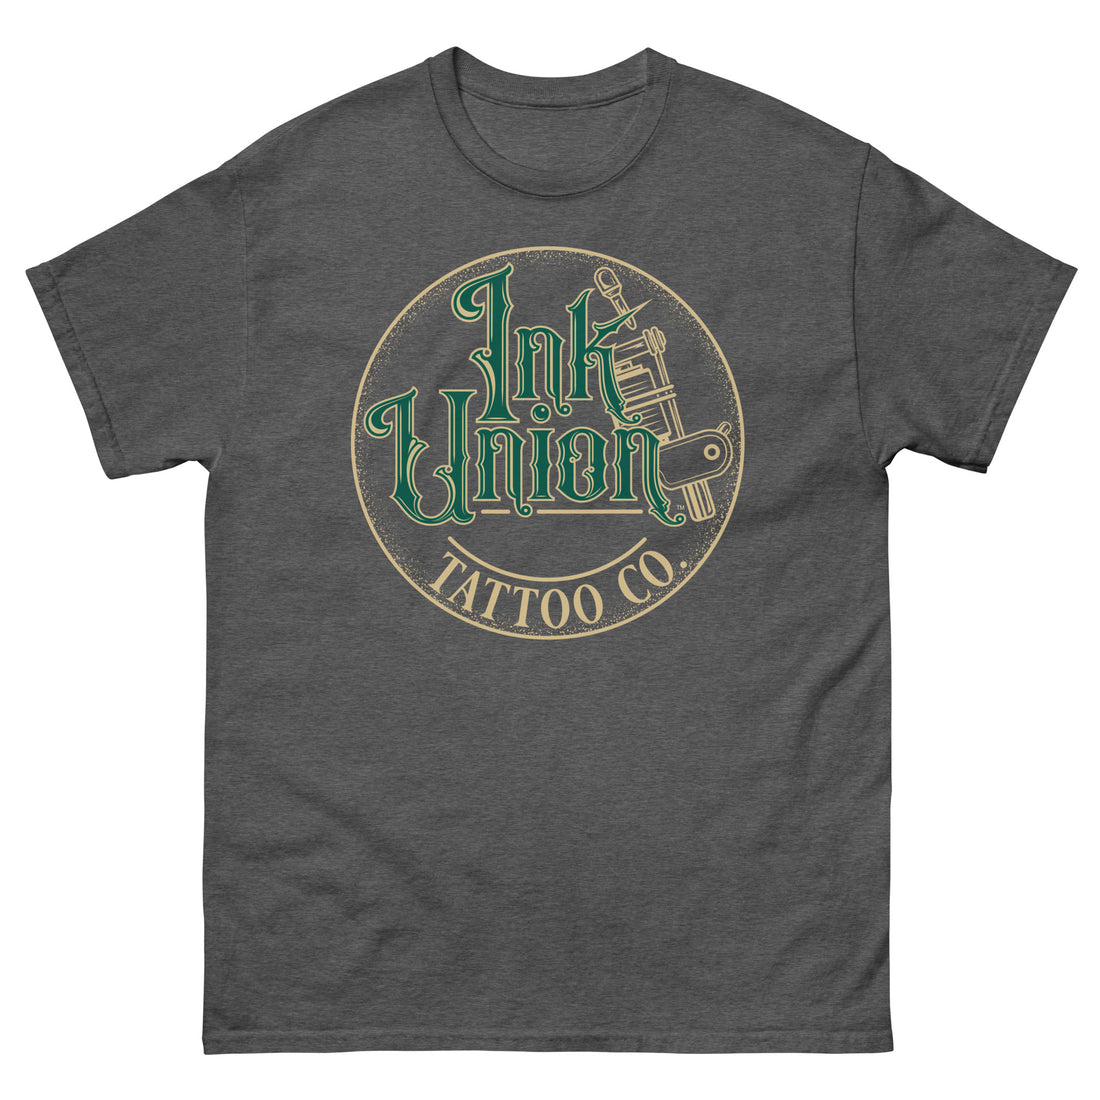 A dark grey t-shirt with a gold circle containing fancy lettering in green and gold that says Ink Union and a gold tattoo machine peeking out from behind on the right side. There is a dot work gradient inside the circle, and the words Tattoo Co. in gold are at the bottom of the design.